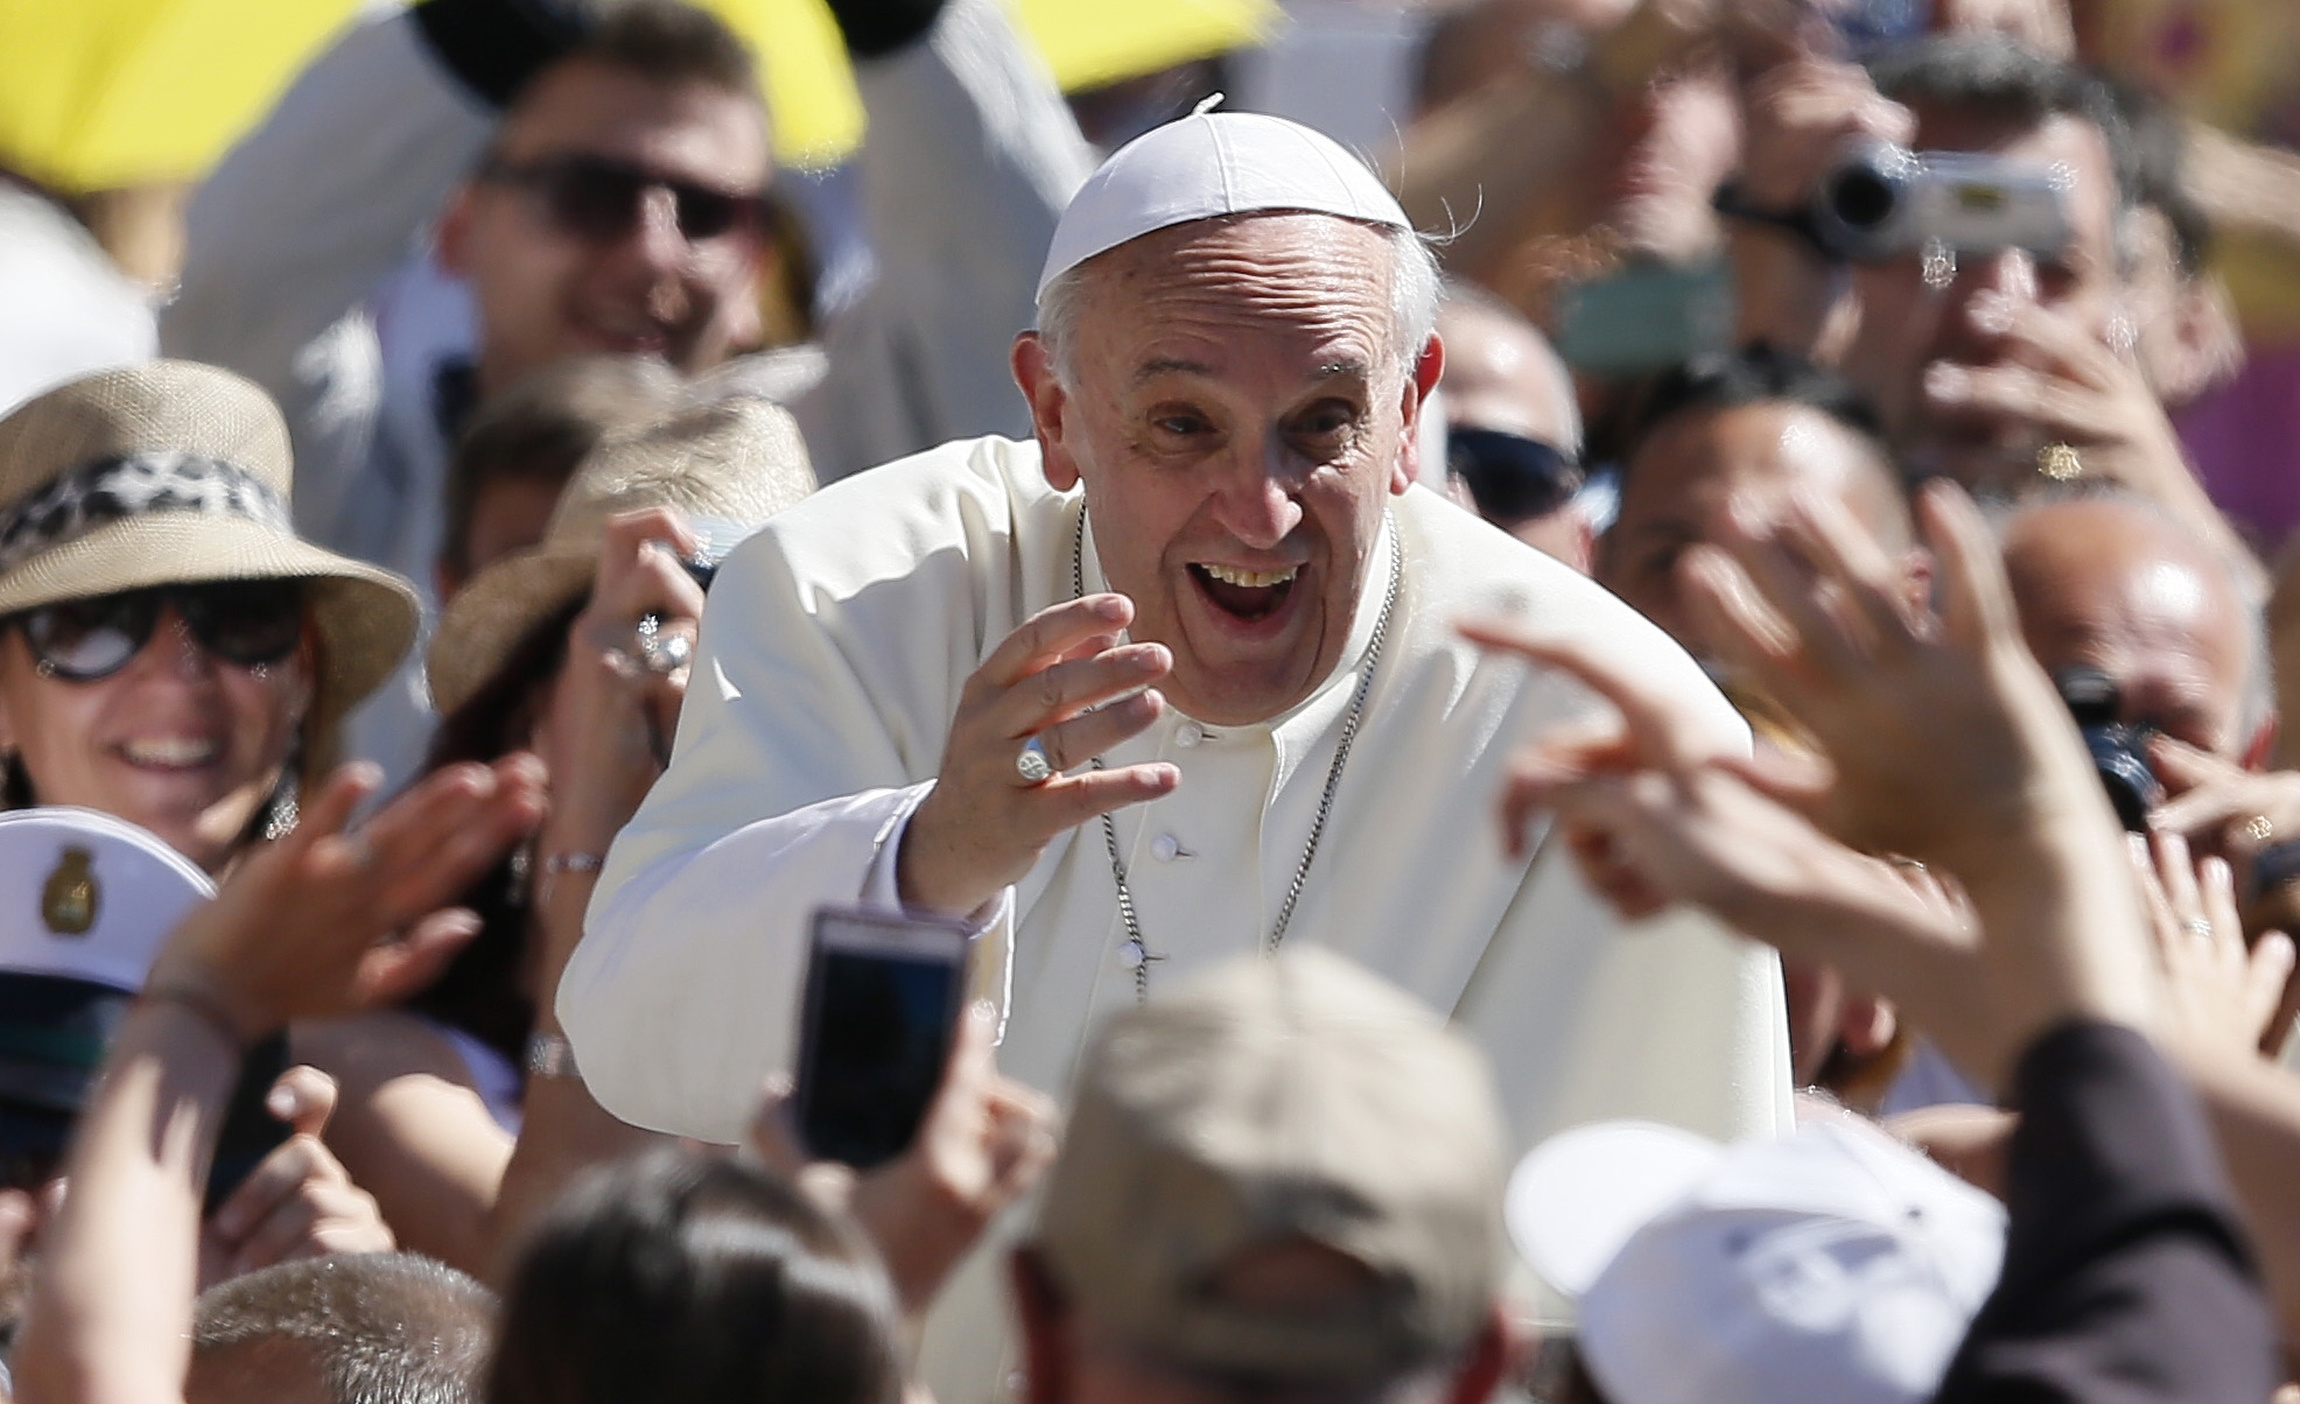 Pope Francis greets pilgrims as he arrives for his weekly general audience in St. Peter's Square at the Vatican June 12. (CNS photo/Paul Haring)